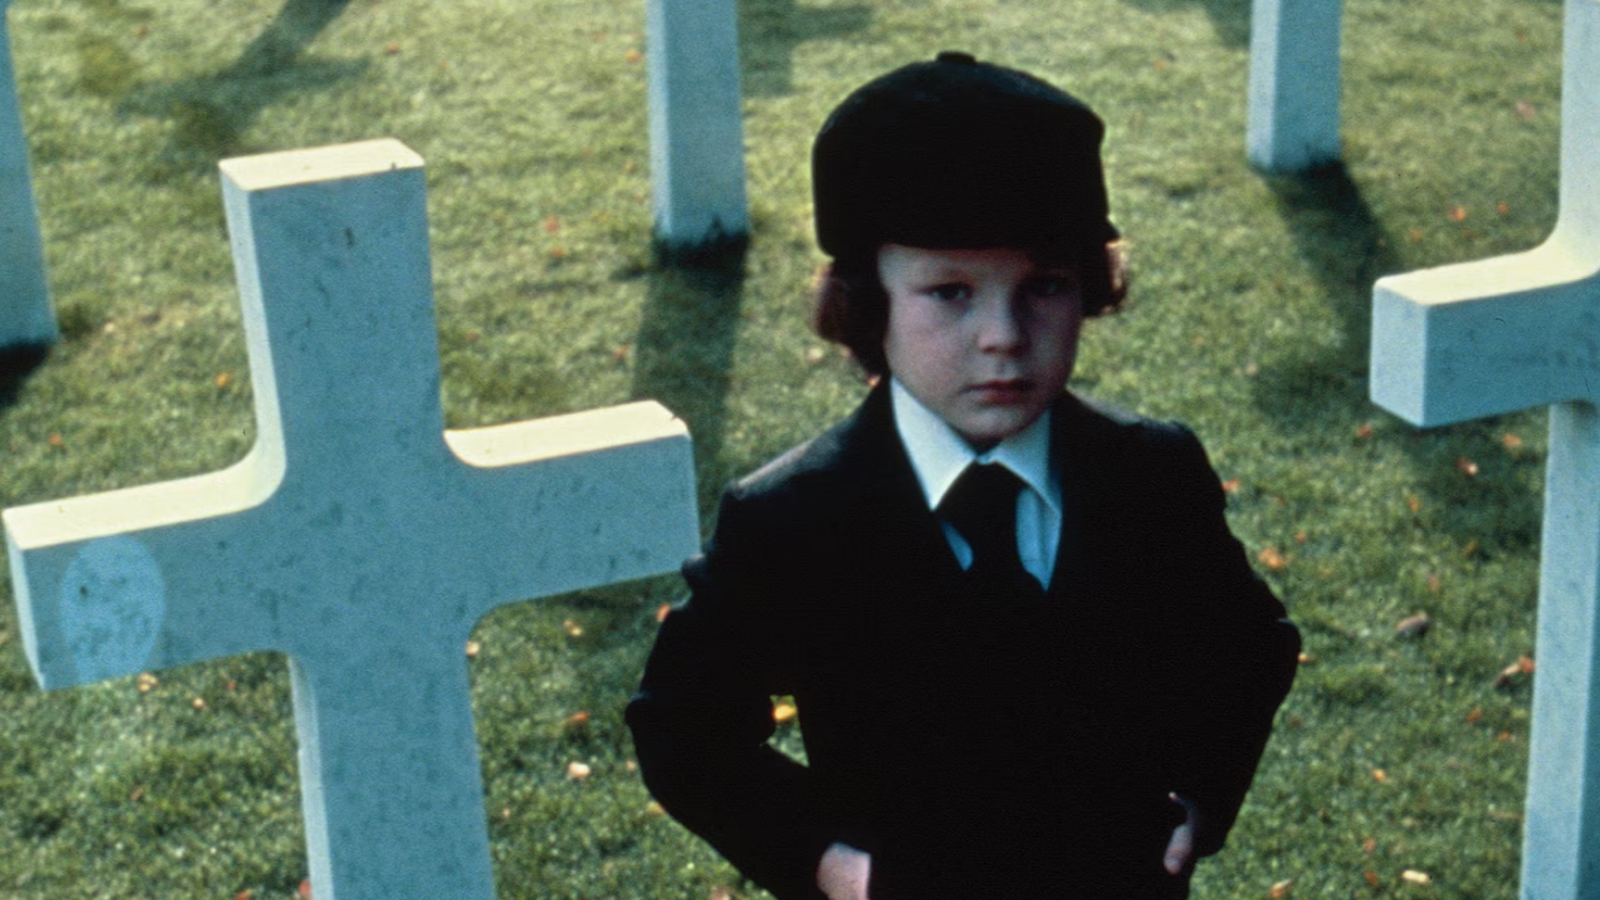 "The Omen" Complete Franchise, Streaming Now on Hulu